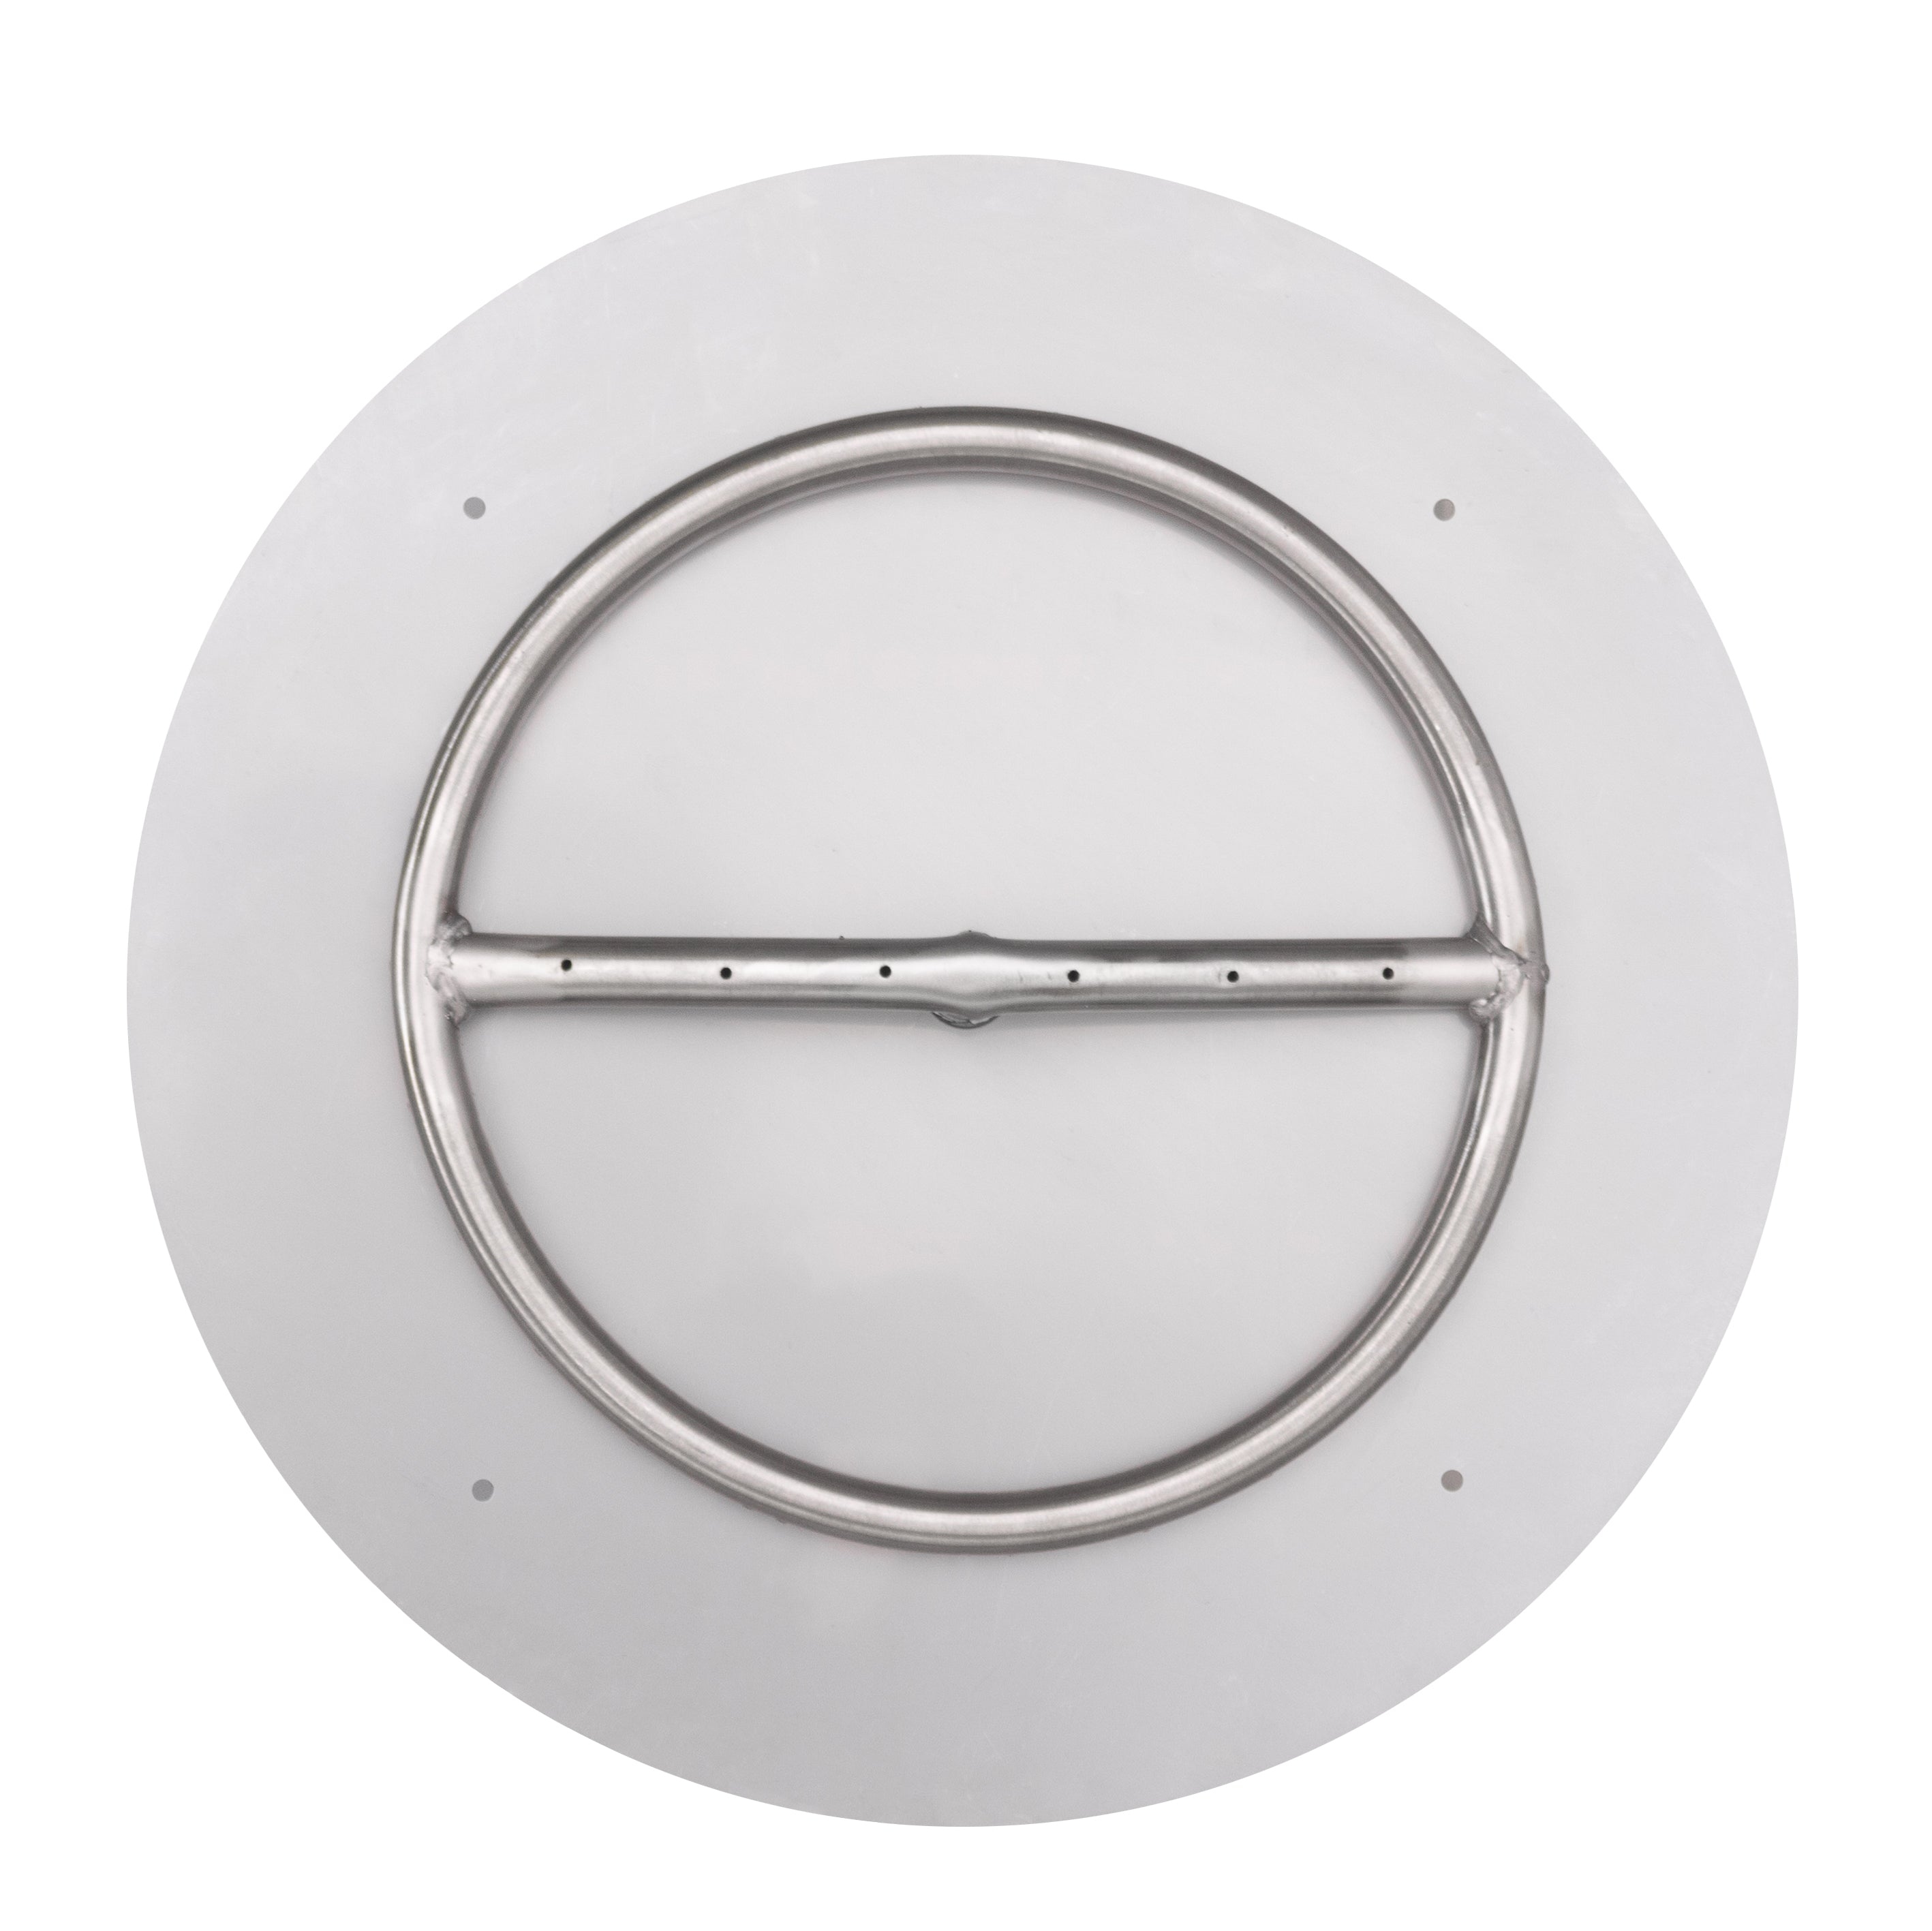 The Outdoor Plus Round Flat Pan with Stainless Steel Round Burner